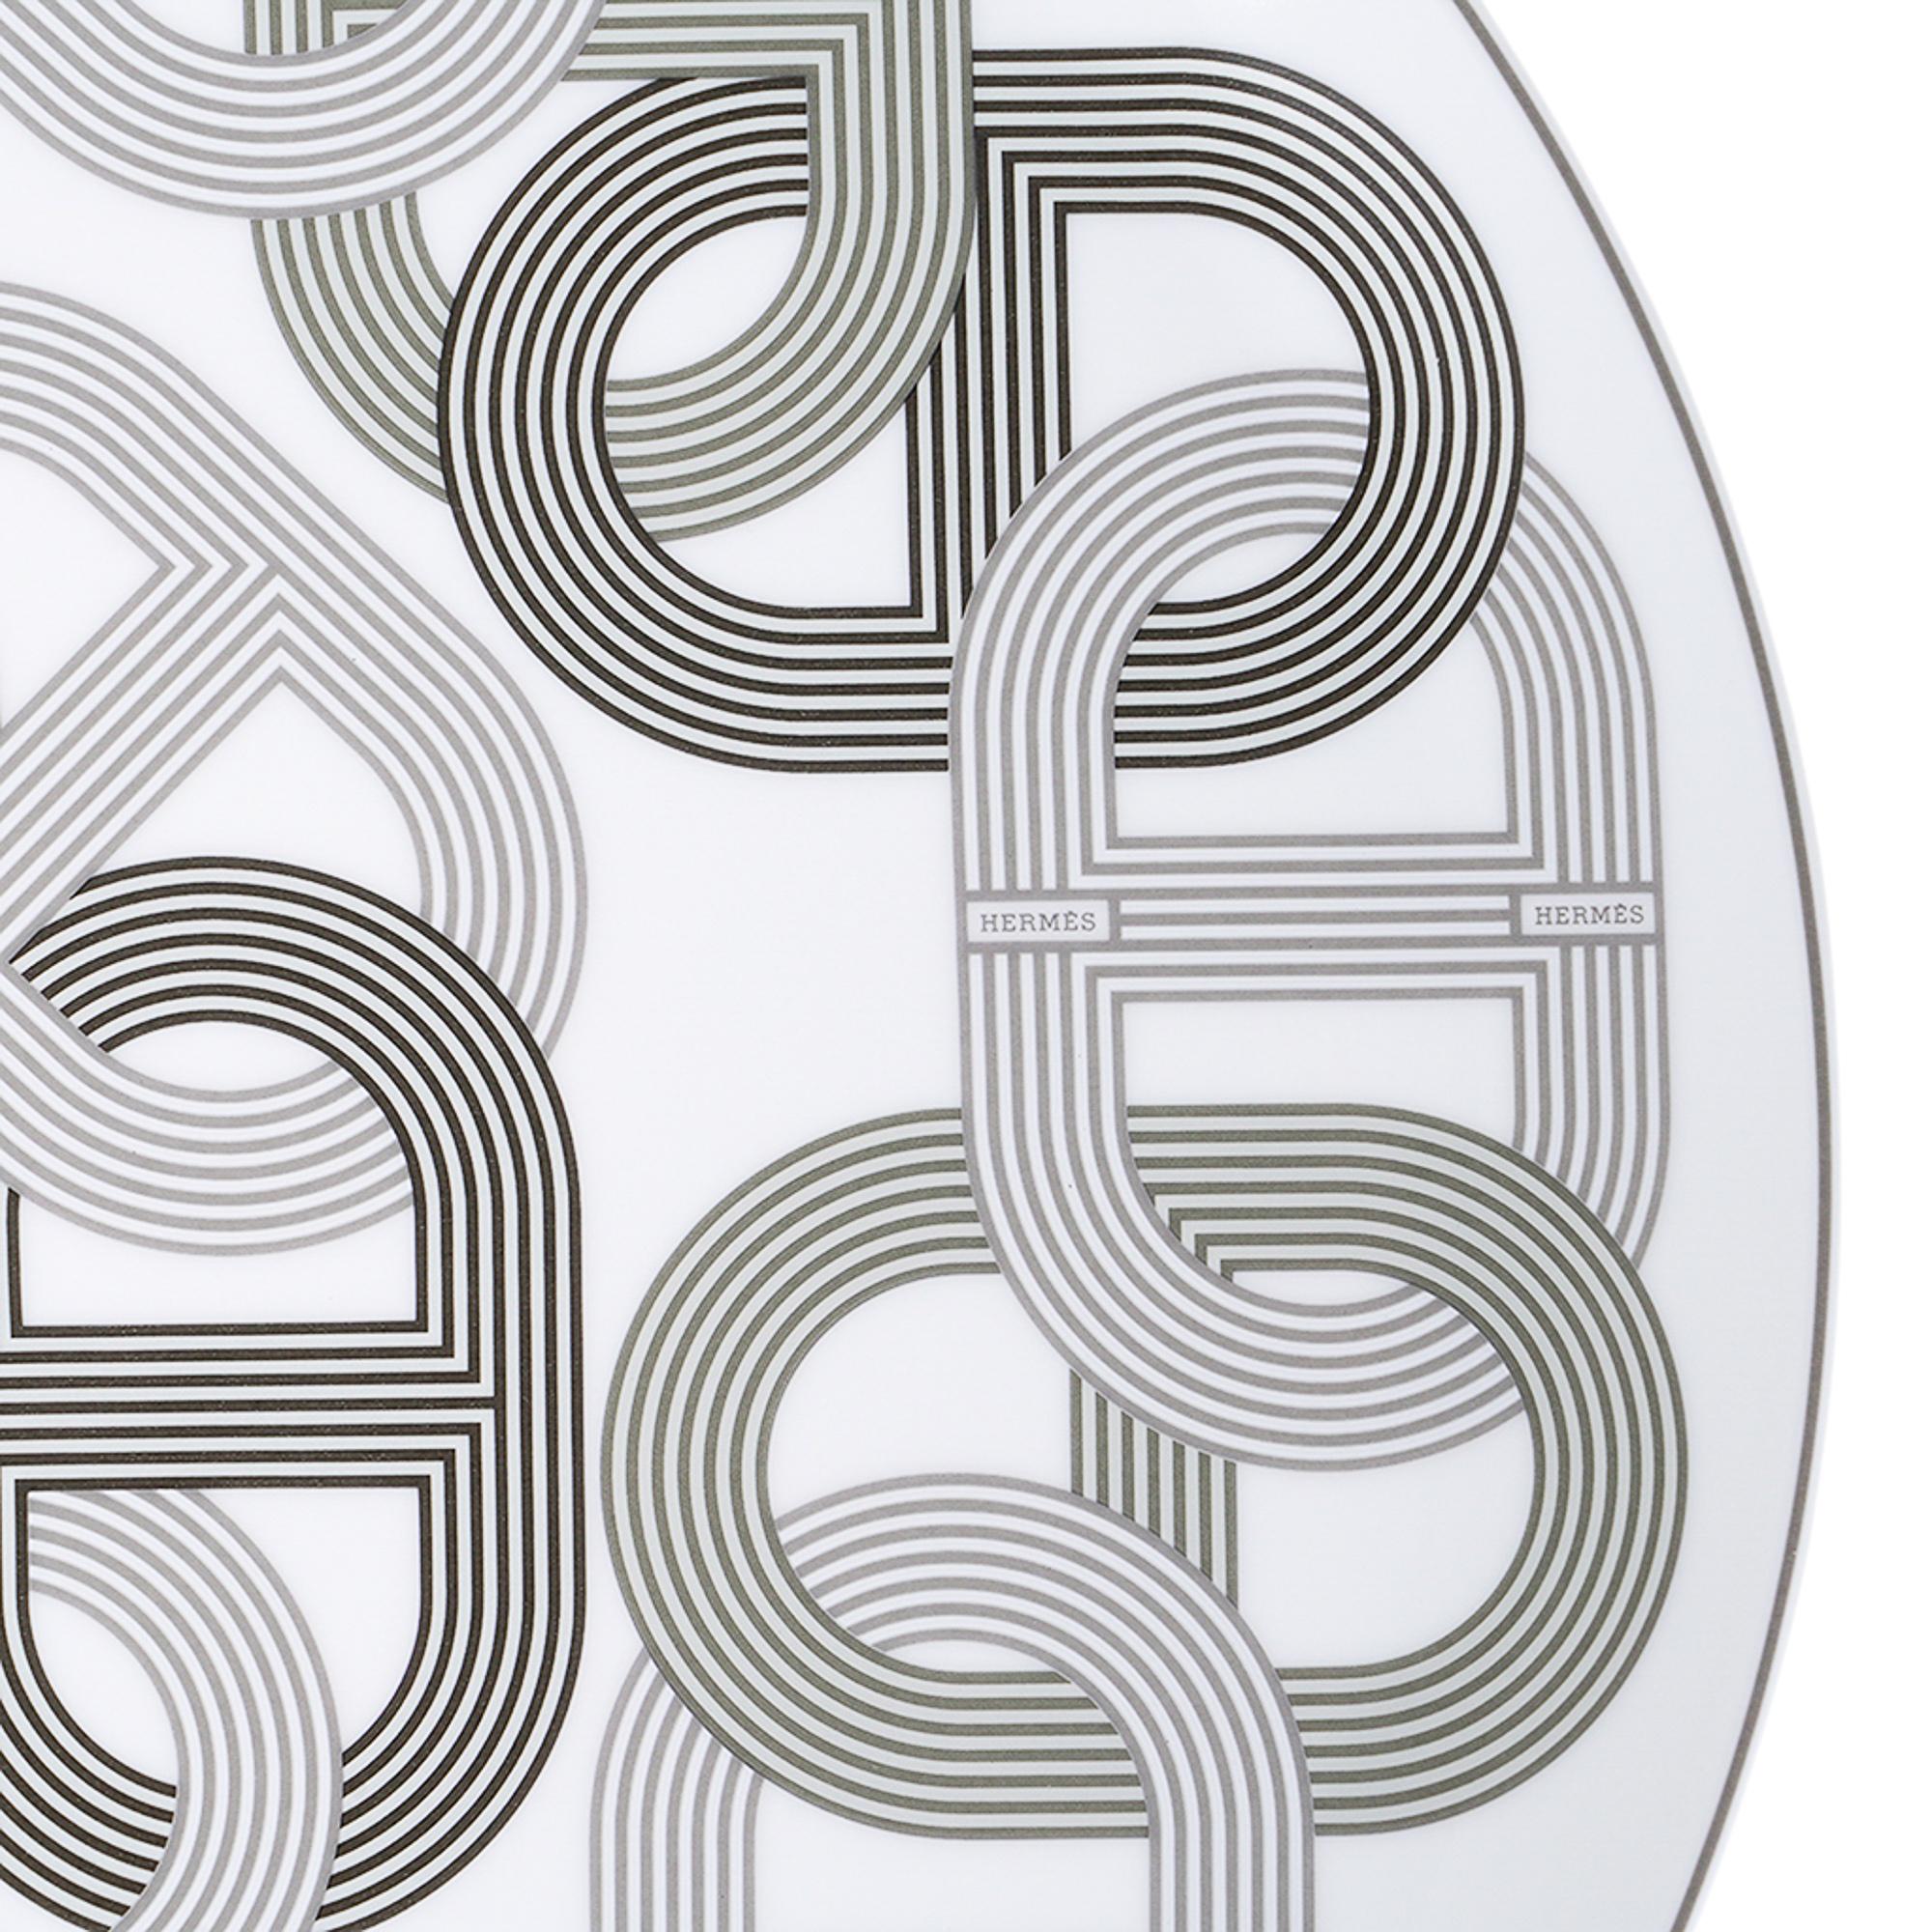 Mightychic offers an Hermes Rallye 24 Tart Platter featured in White.
The iconic Chaine D'Ancre motif creates the curves and straights of the racetrack.
The interwoven shapes are an infinite circuit created in black and gray.
Rallye 24 is